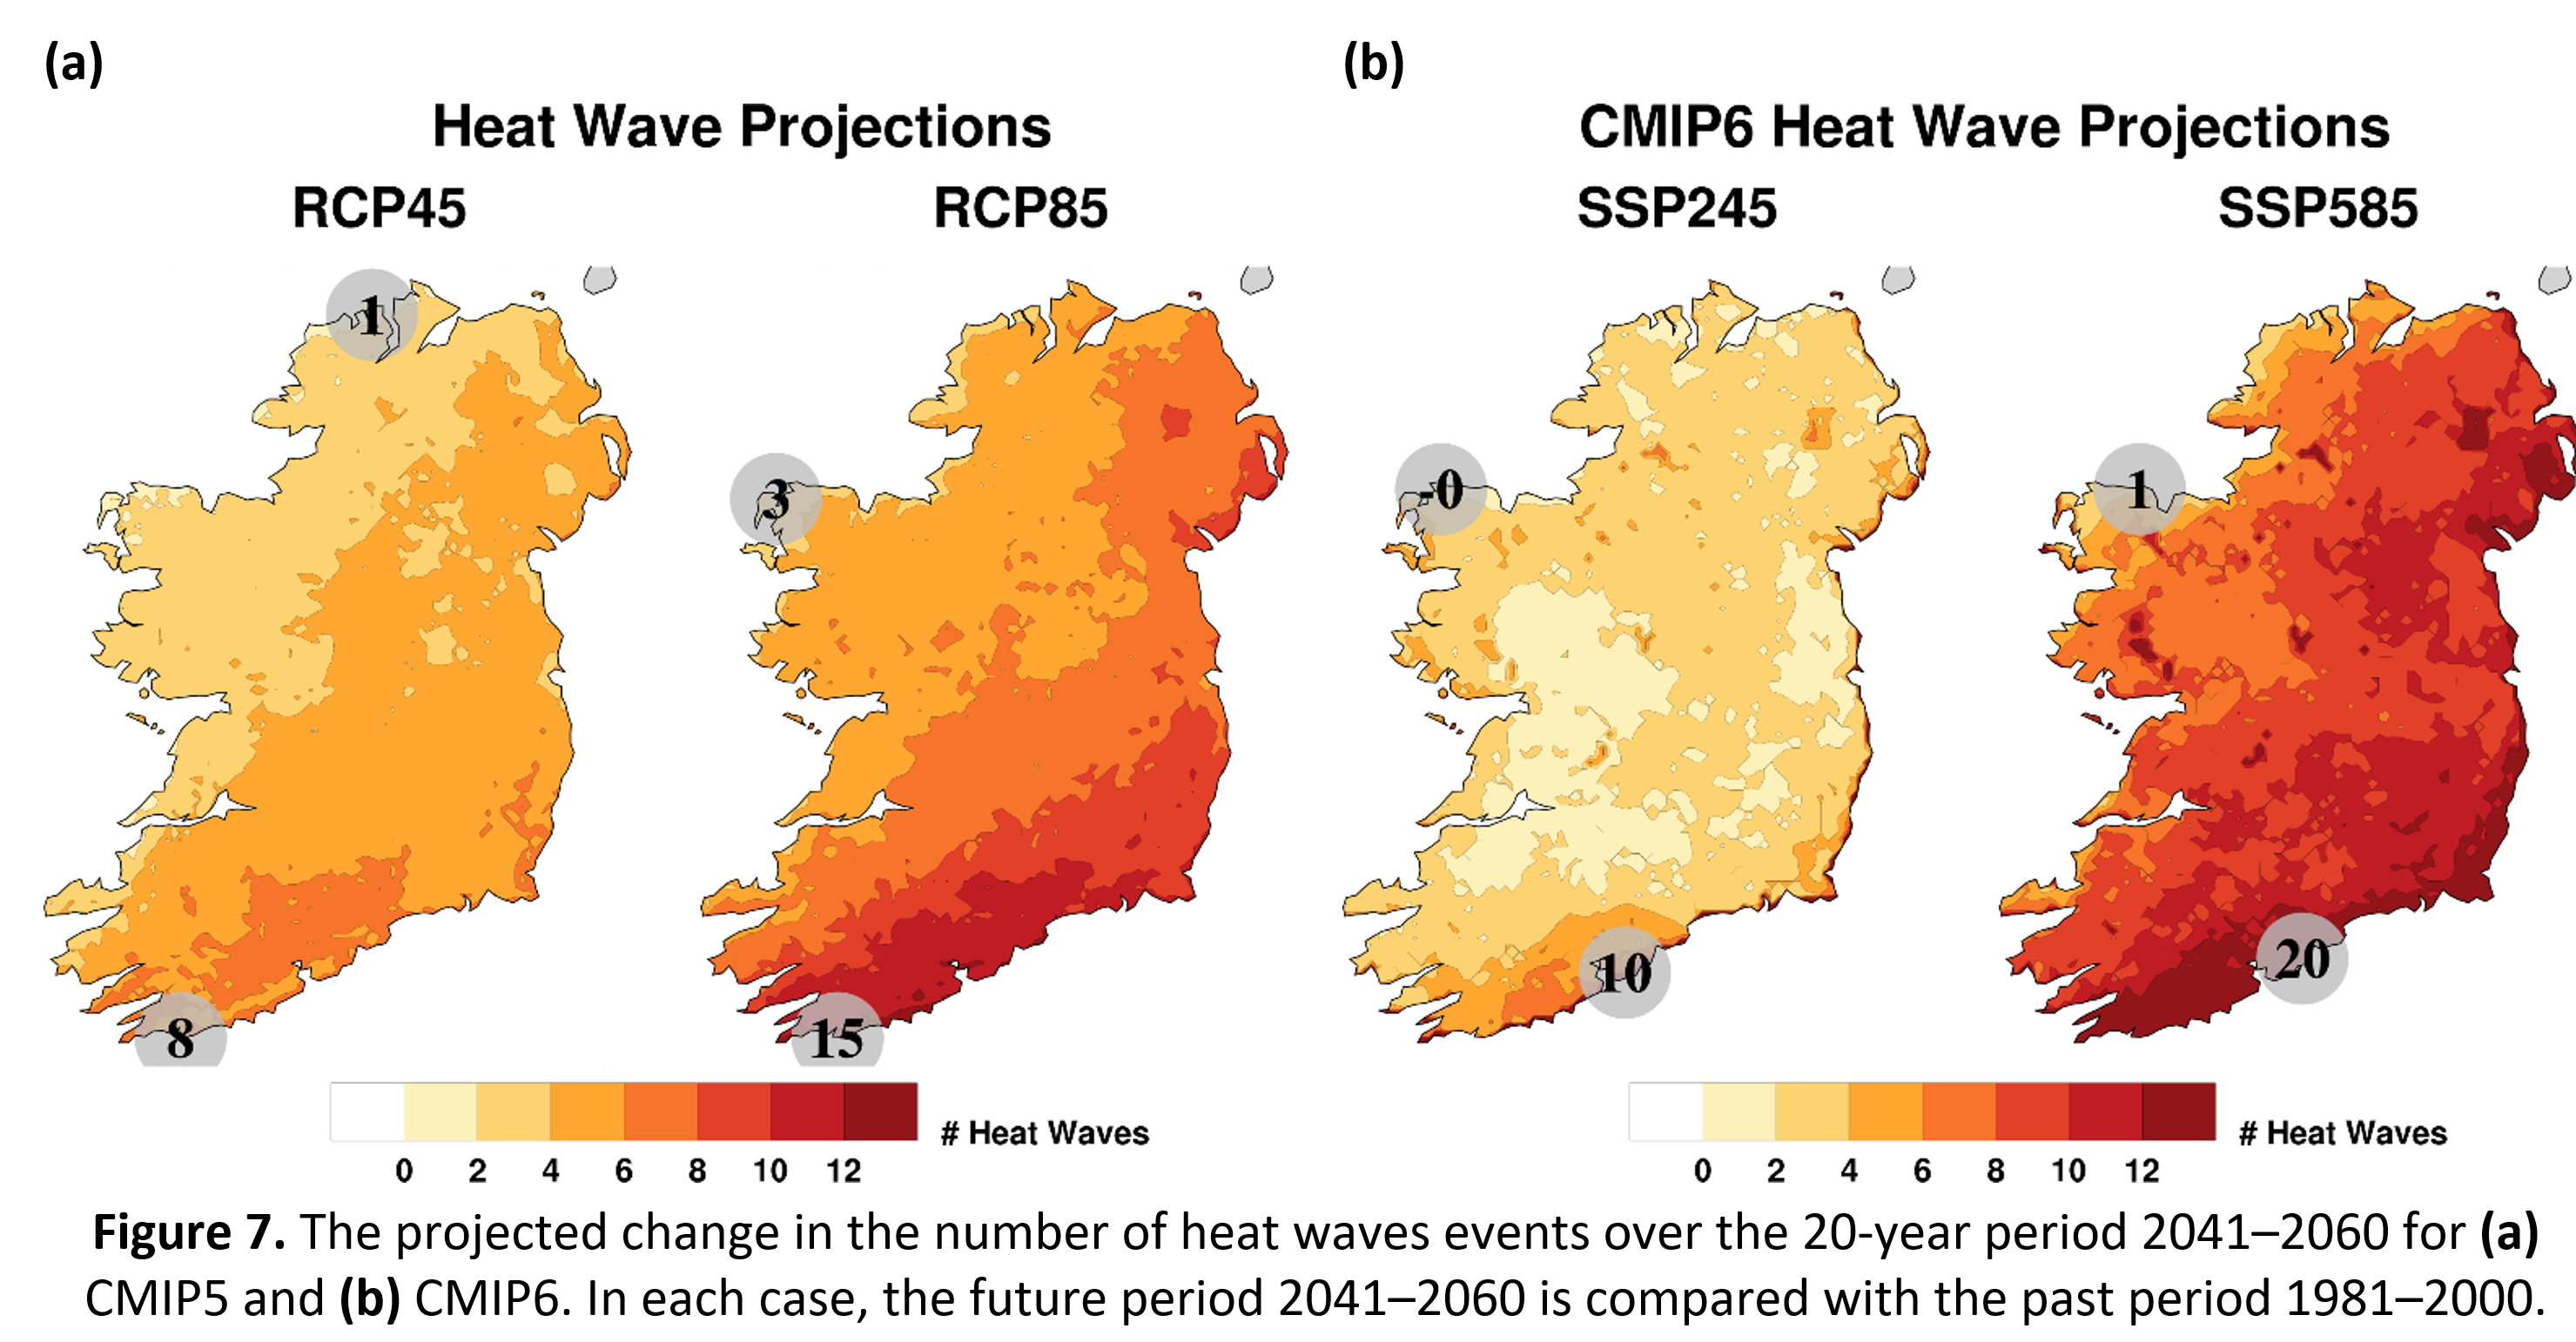 Figure 7. The projected change in the number of heat waves events over the 20-year period 2041–2060 for (a) CMIP5 and (b) CMIP6. In each case, the future period 2041–2060 is compared with the past period 1981–2000.